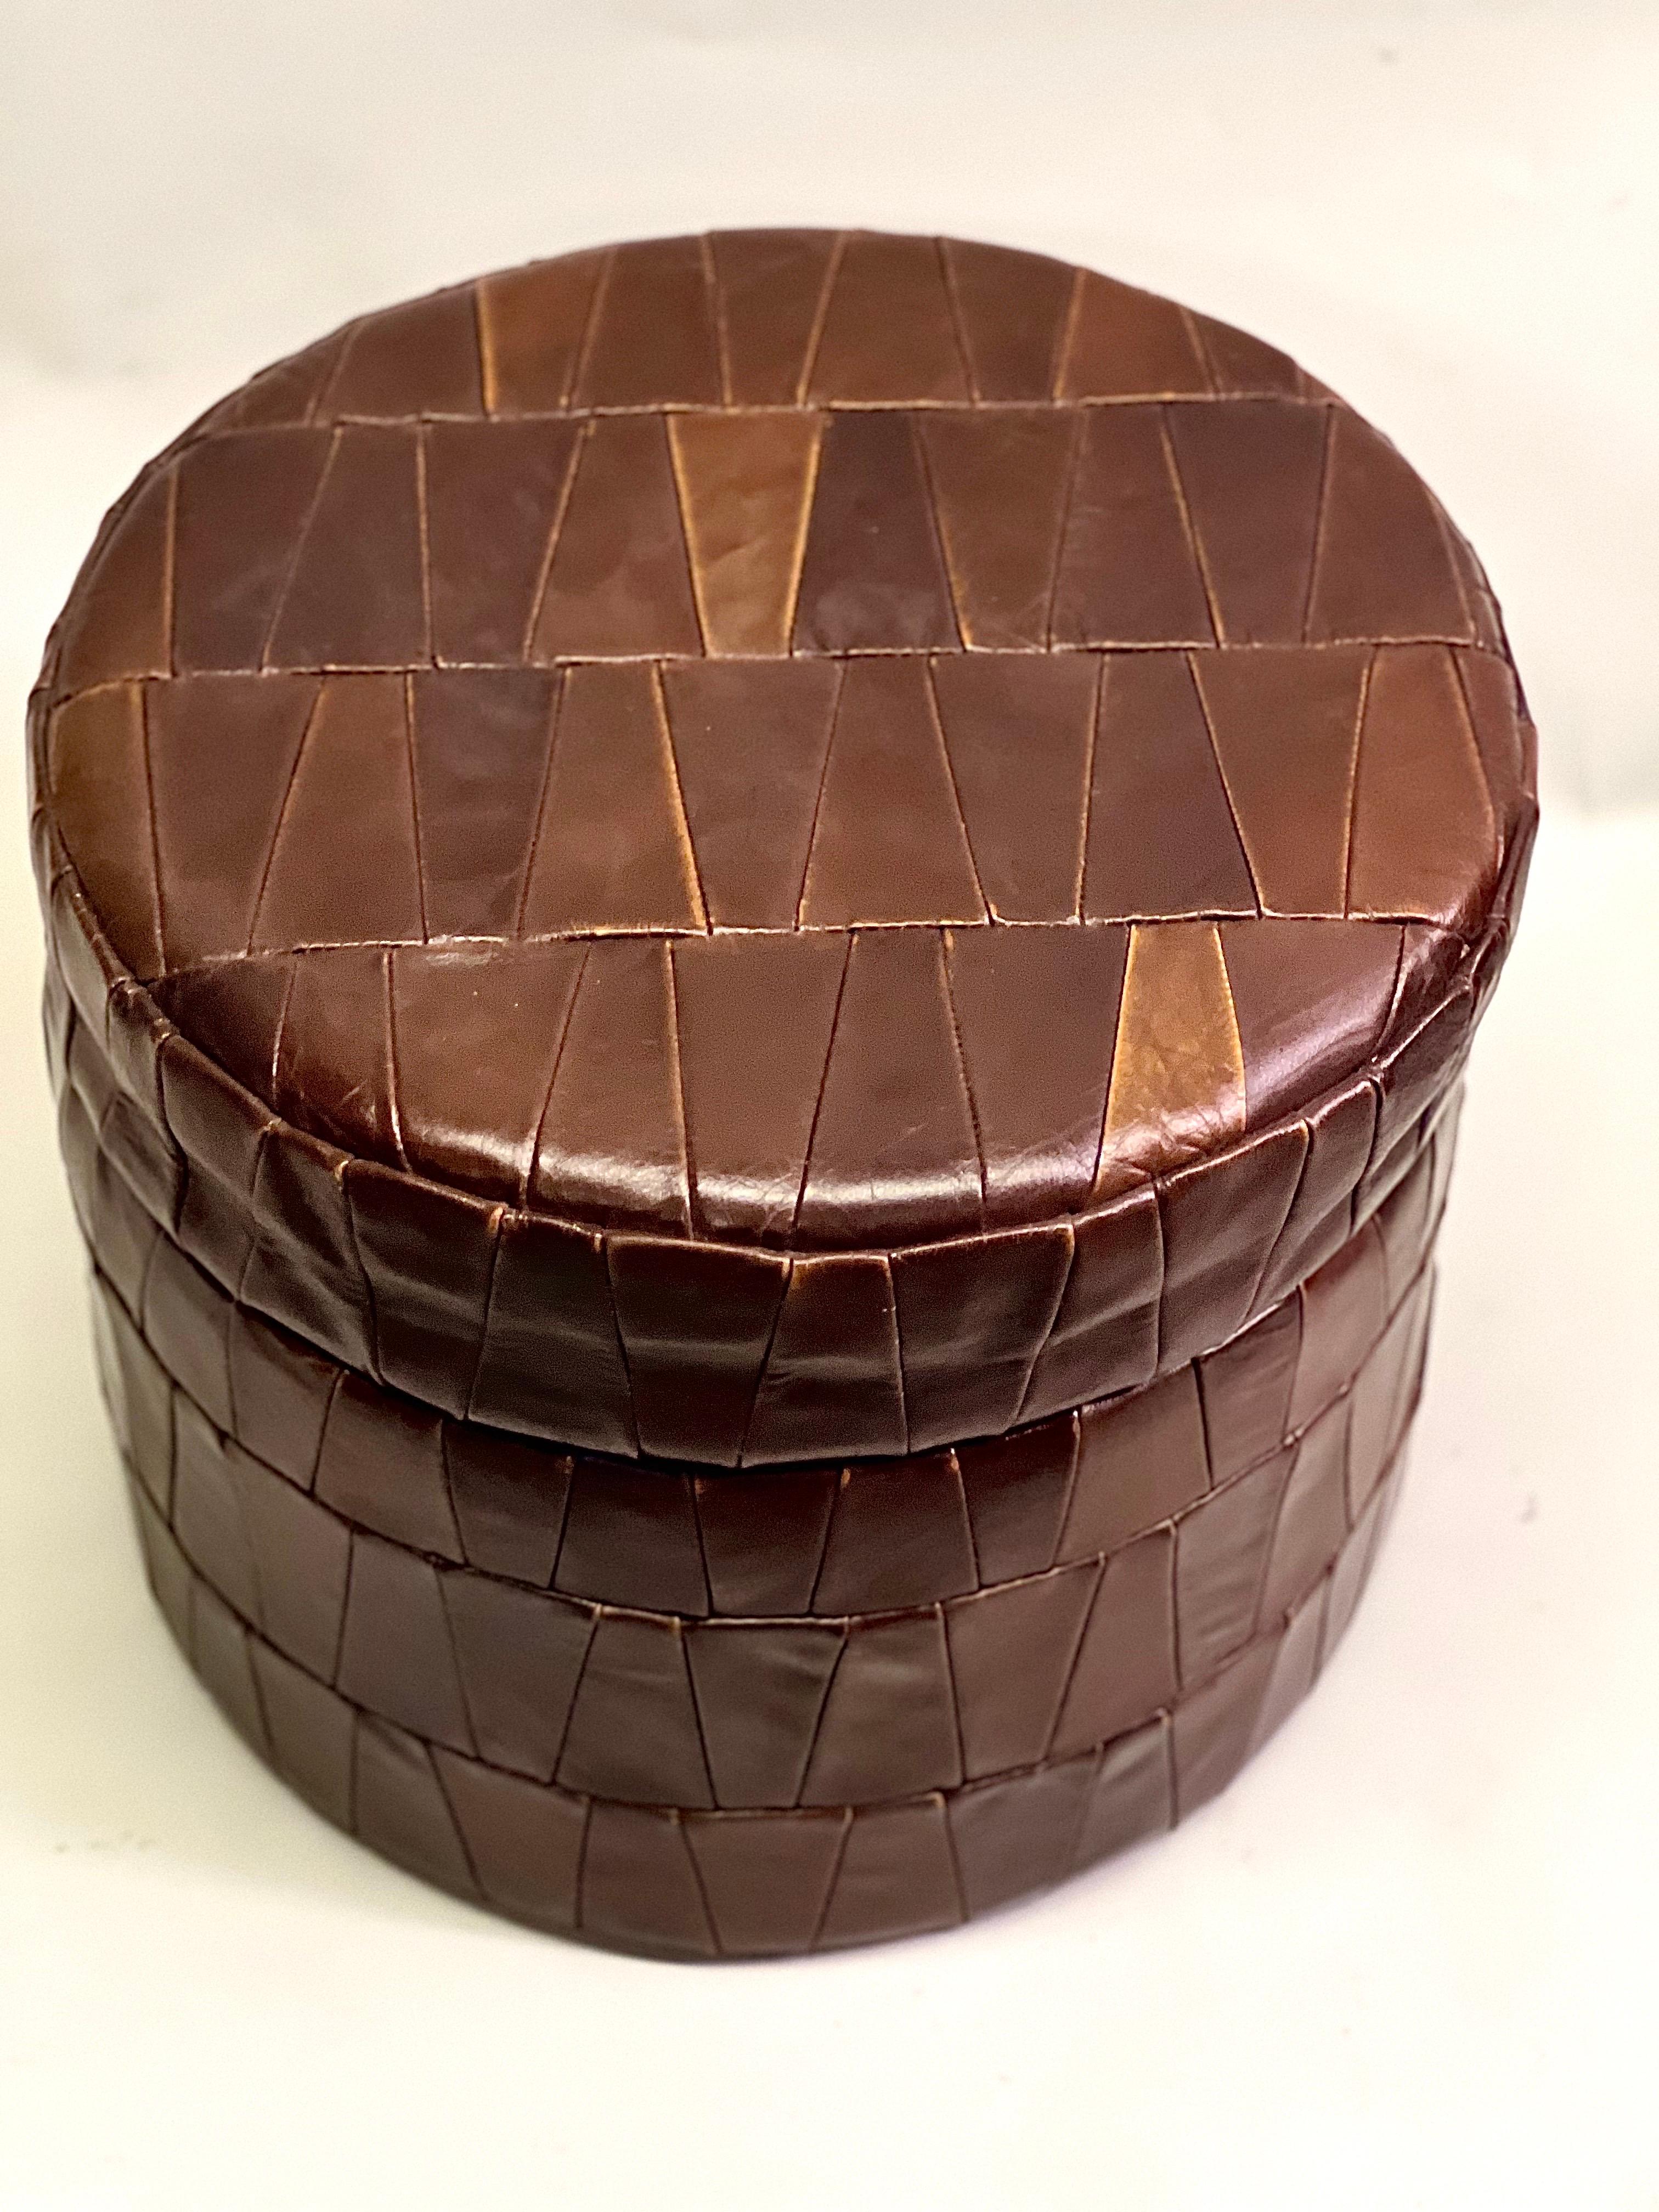 Pair of Swiss Modern Patchwork Leather Storage Ottomans/ Stools by De Sede, 1960 For Sale 2